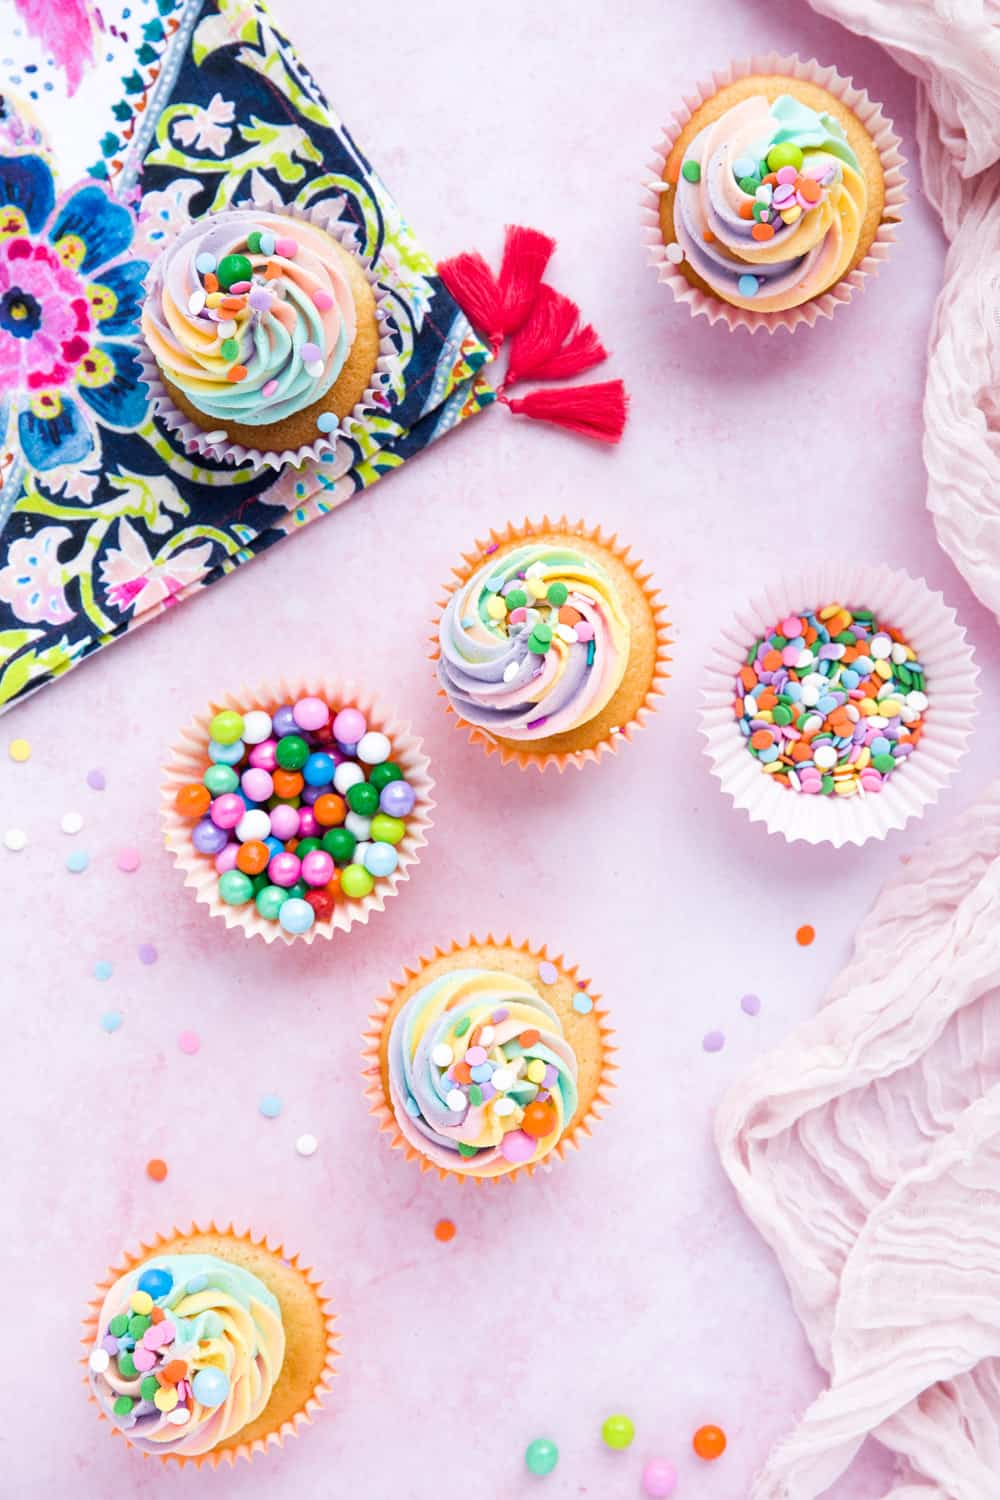 Overhead shot of cupcakes with rainbow coloured icing. There is a cupcake liner filled with round colourful sprinkles and a brightly coloured napkin. 